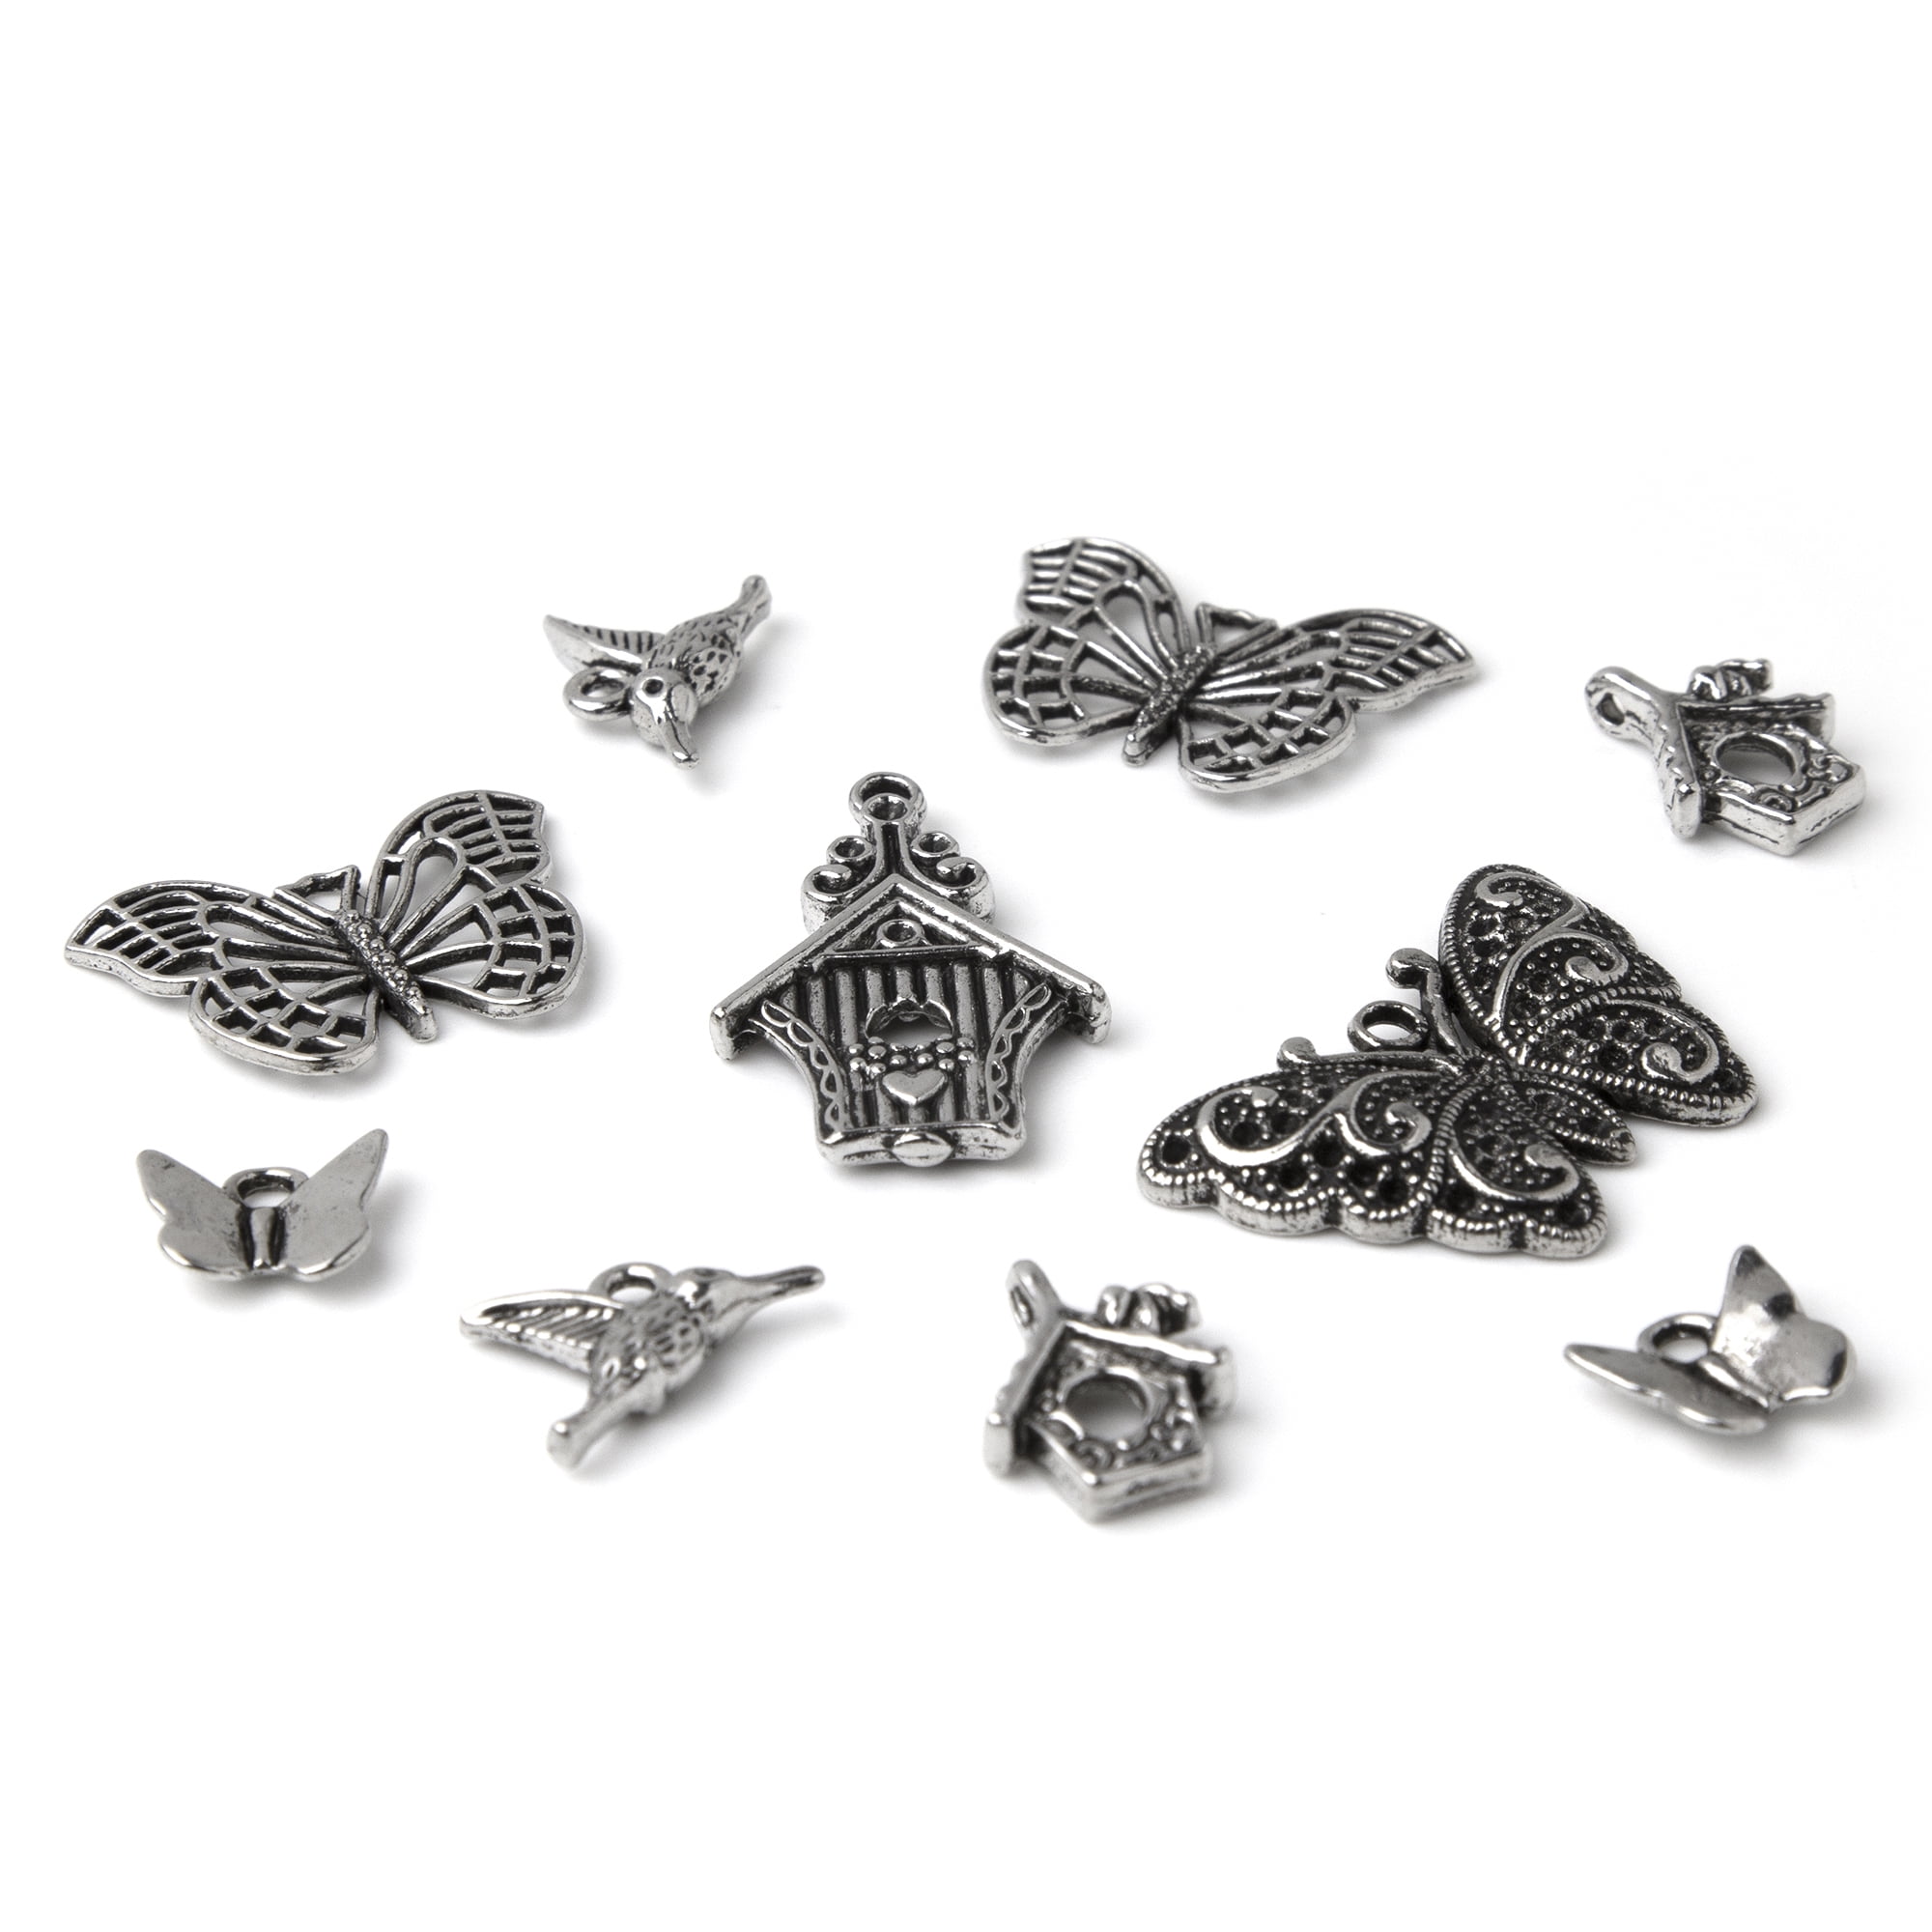 jialeey Butterfly Charms Beads Necklace Pendants DIY for Jewelry Making and  Crafting, JIALEEY 60 PCS Tibetan Silver Plated Butterfly